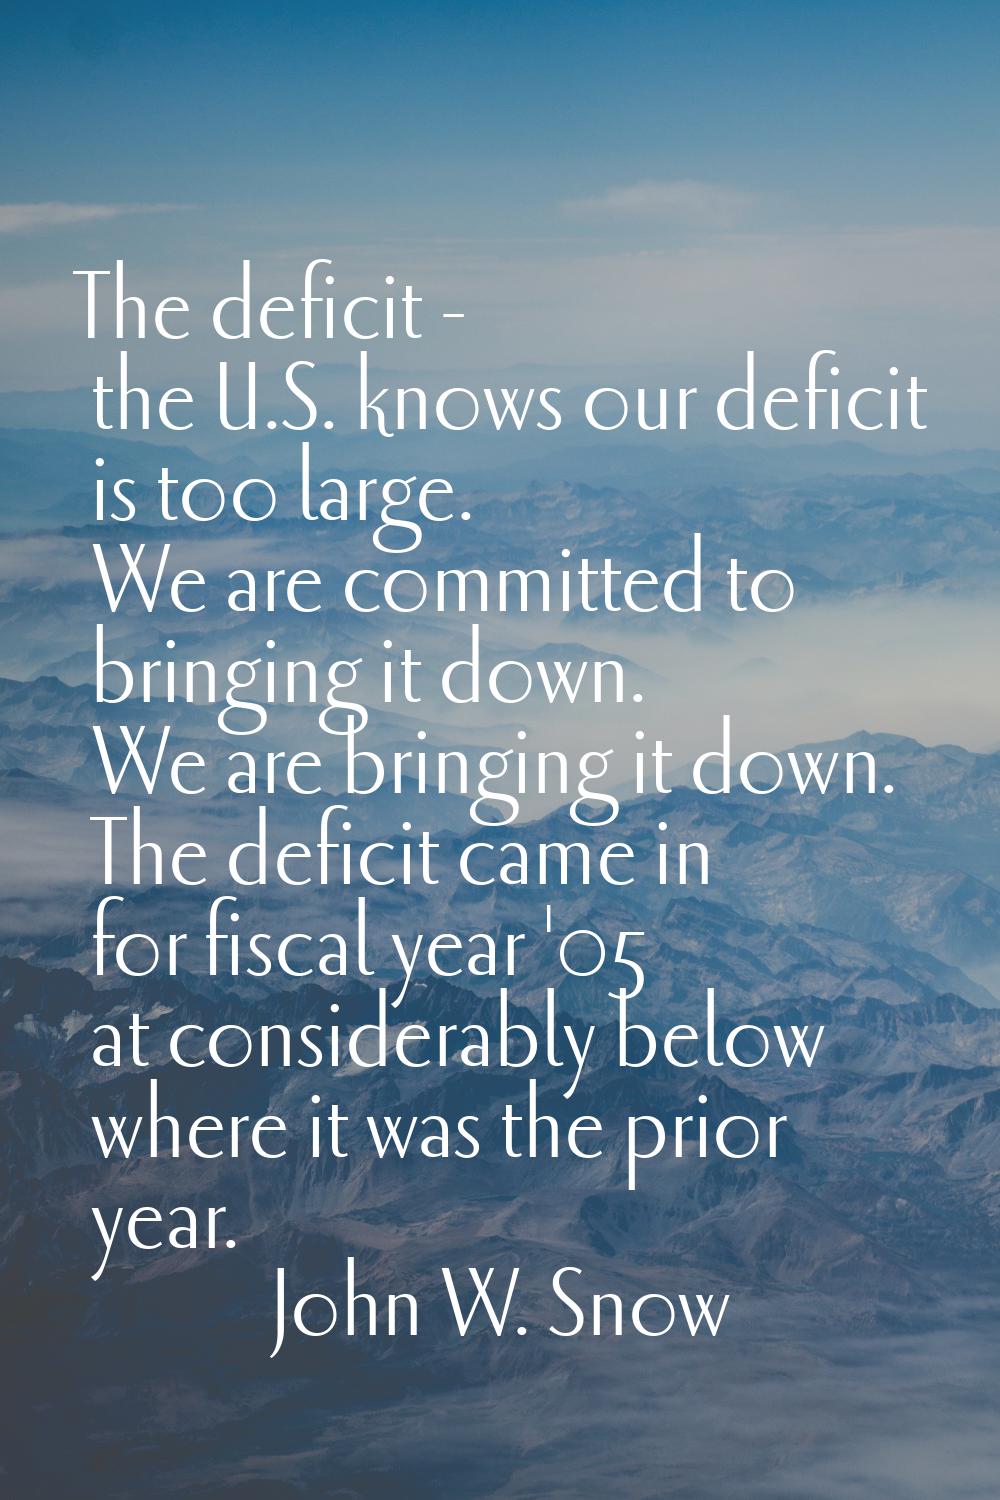 The deficit - the U.S. knows our deficit is too large. We are committed to bringing it down. We are